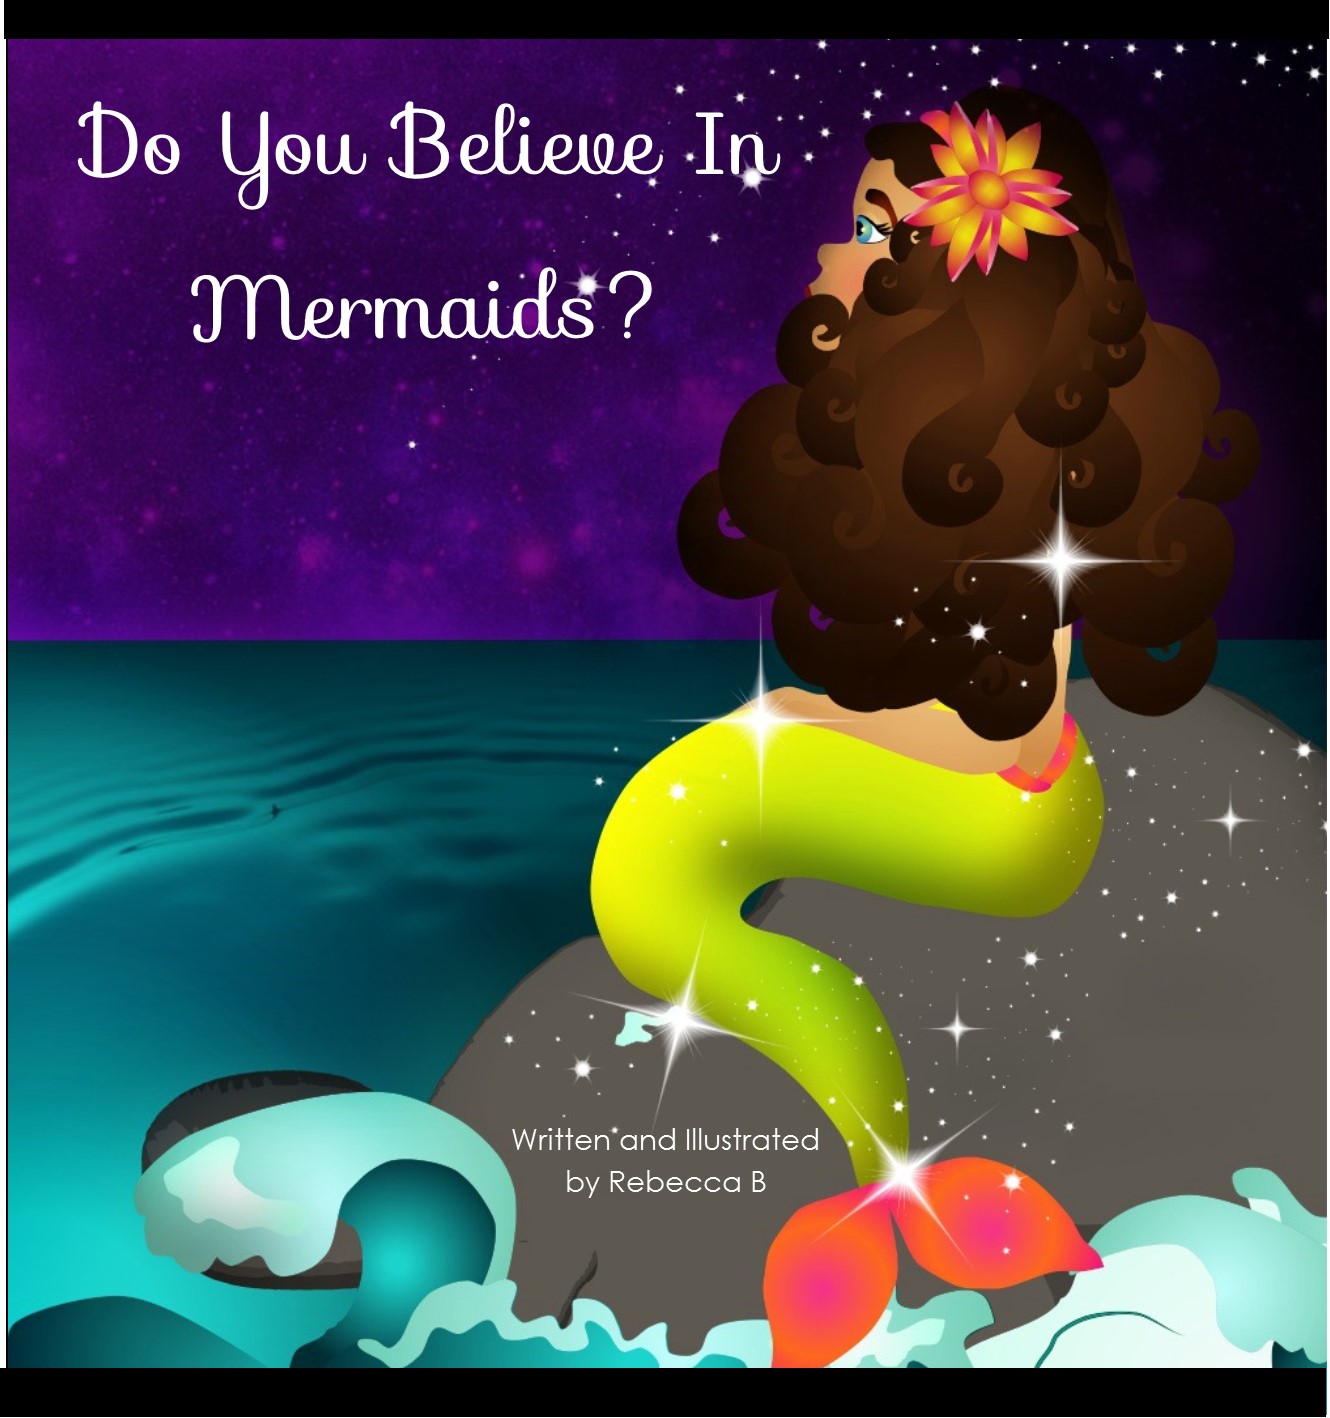 What if you were a mermaid's wish?